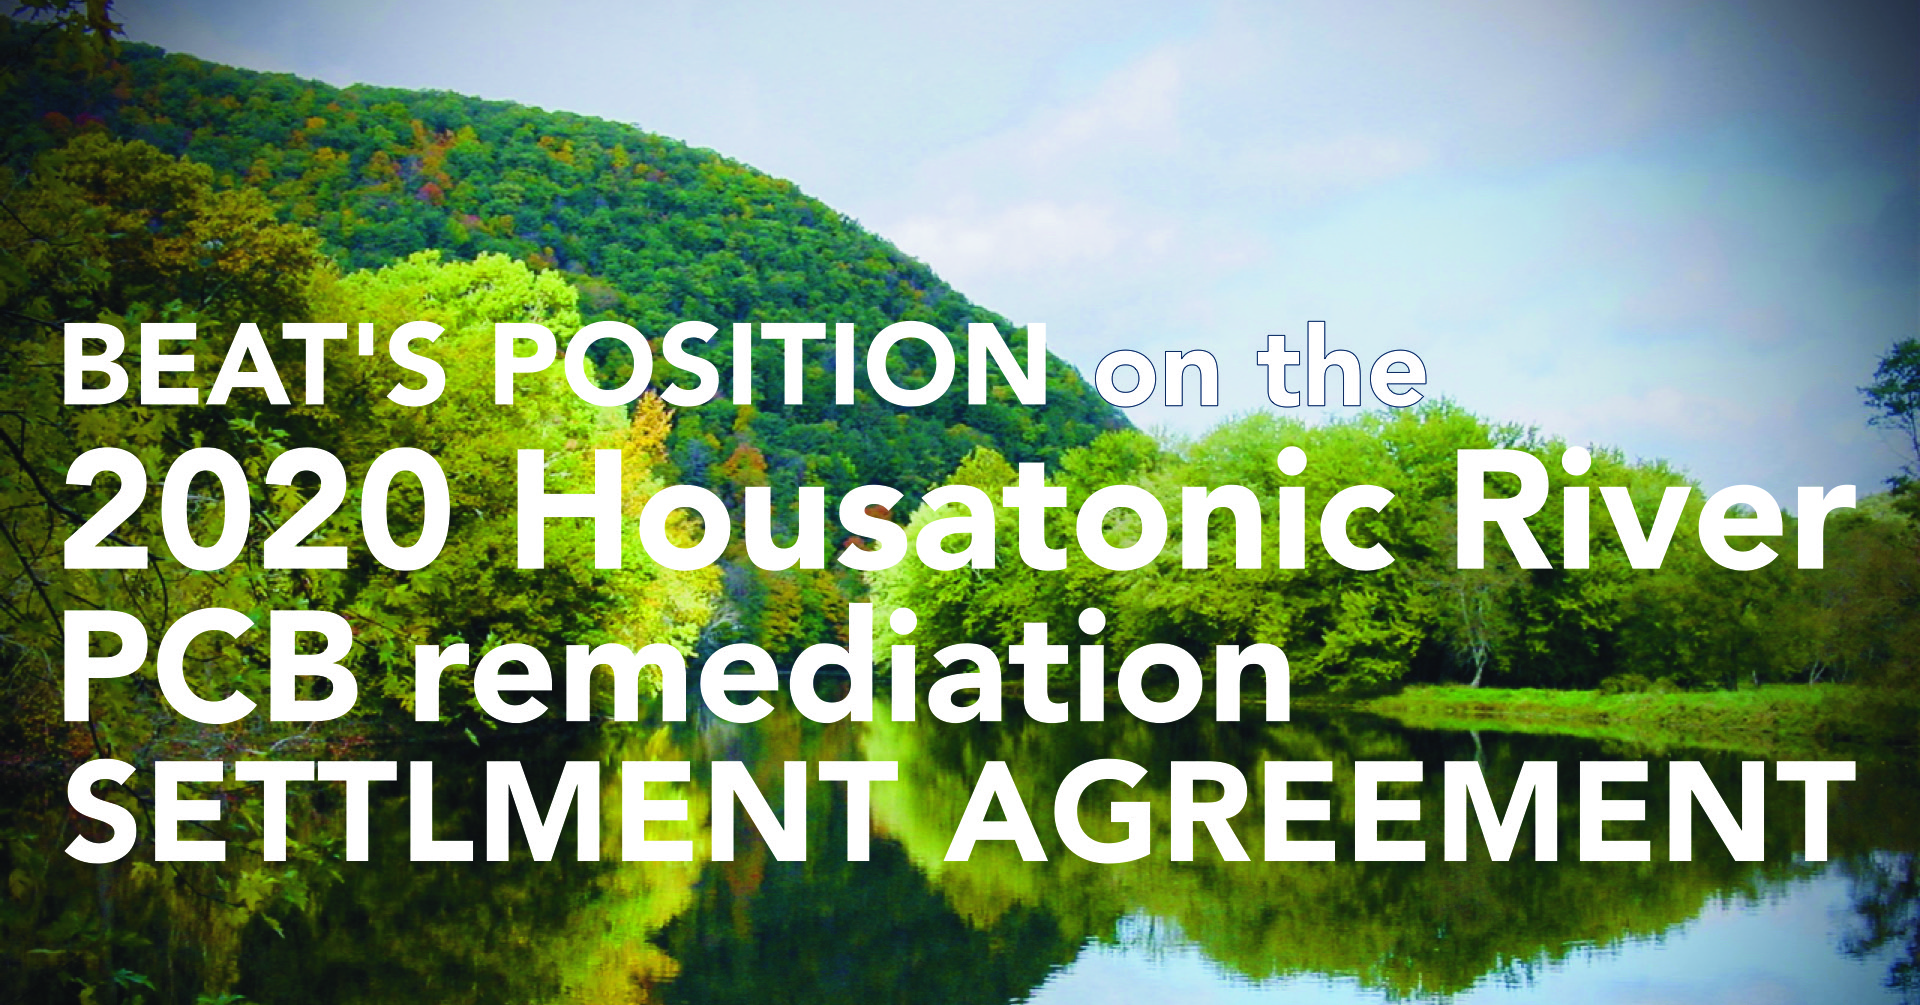 BEAT’s Position On The 2020 Housatonic River PCB Remediation Settlement Agreement